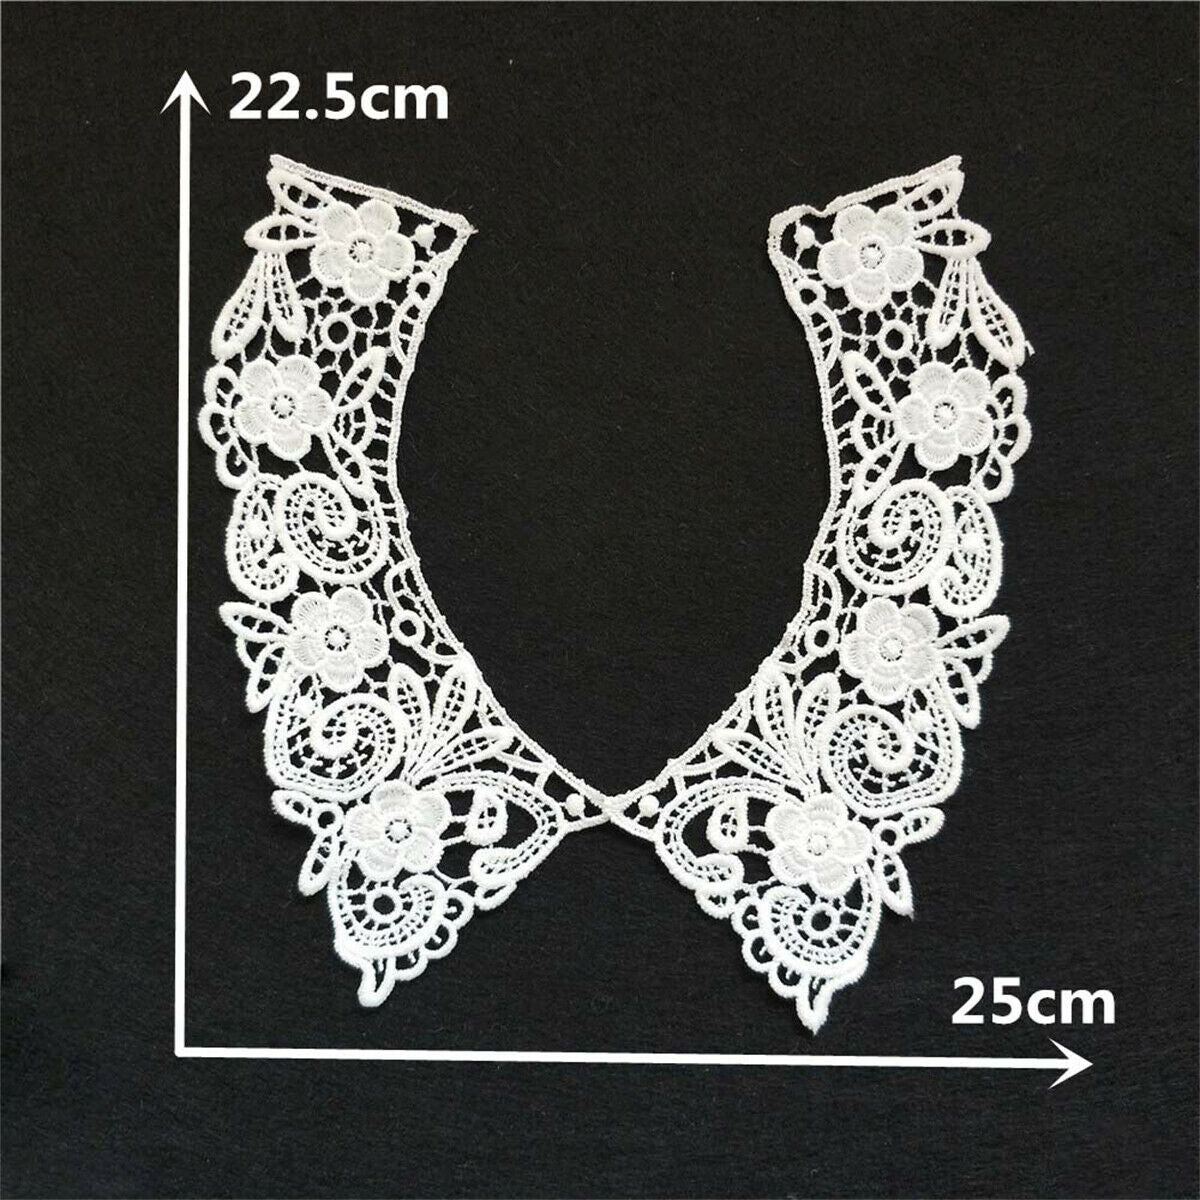 2X Lace Fabric Collar Embroidery Milk Fiber Craft Application Sewing Accessories